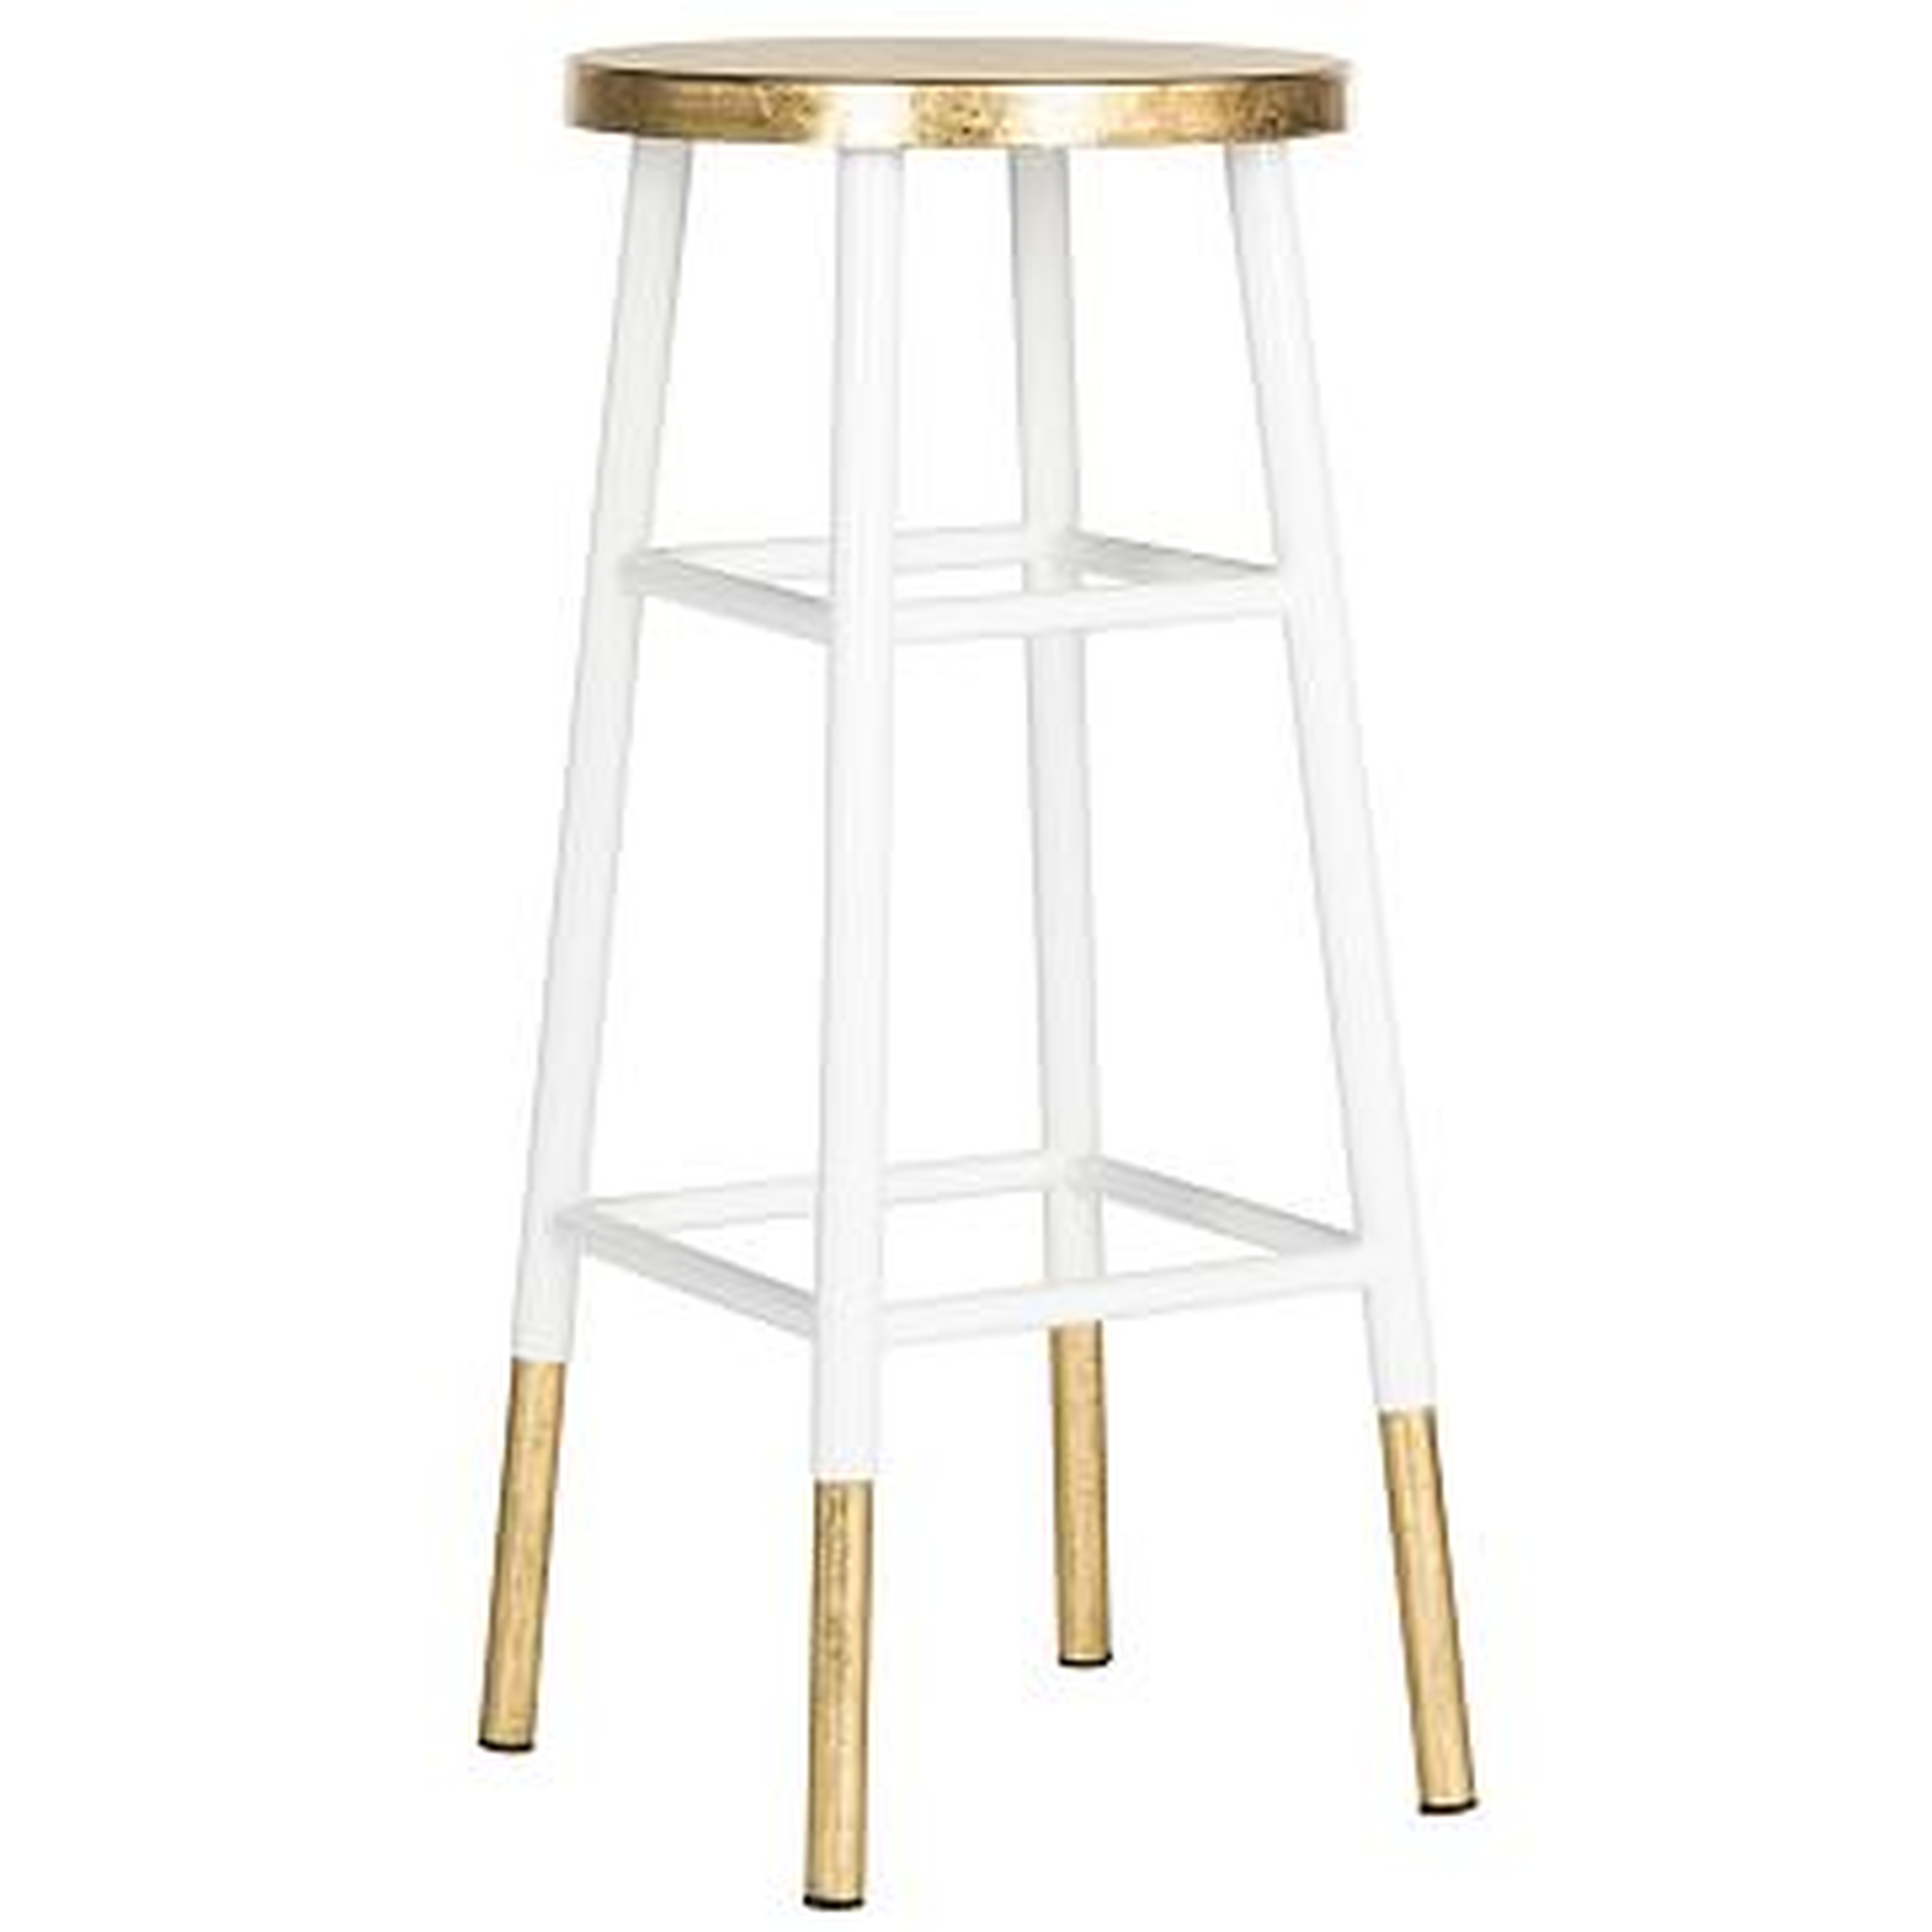 Gold Dipped Iron Bar Stool, White, Gold - West Elm